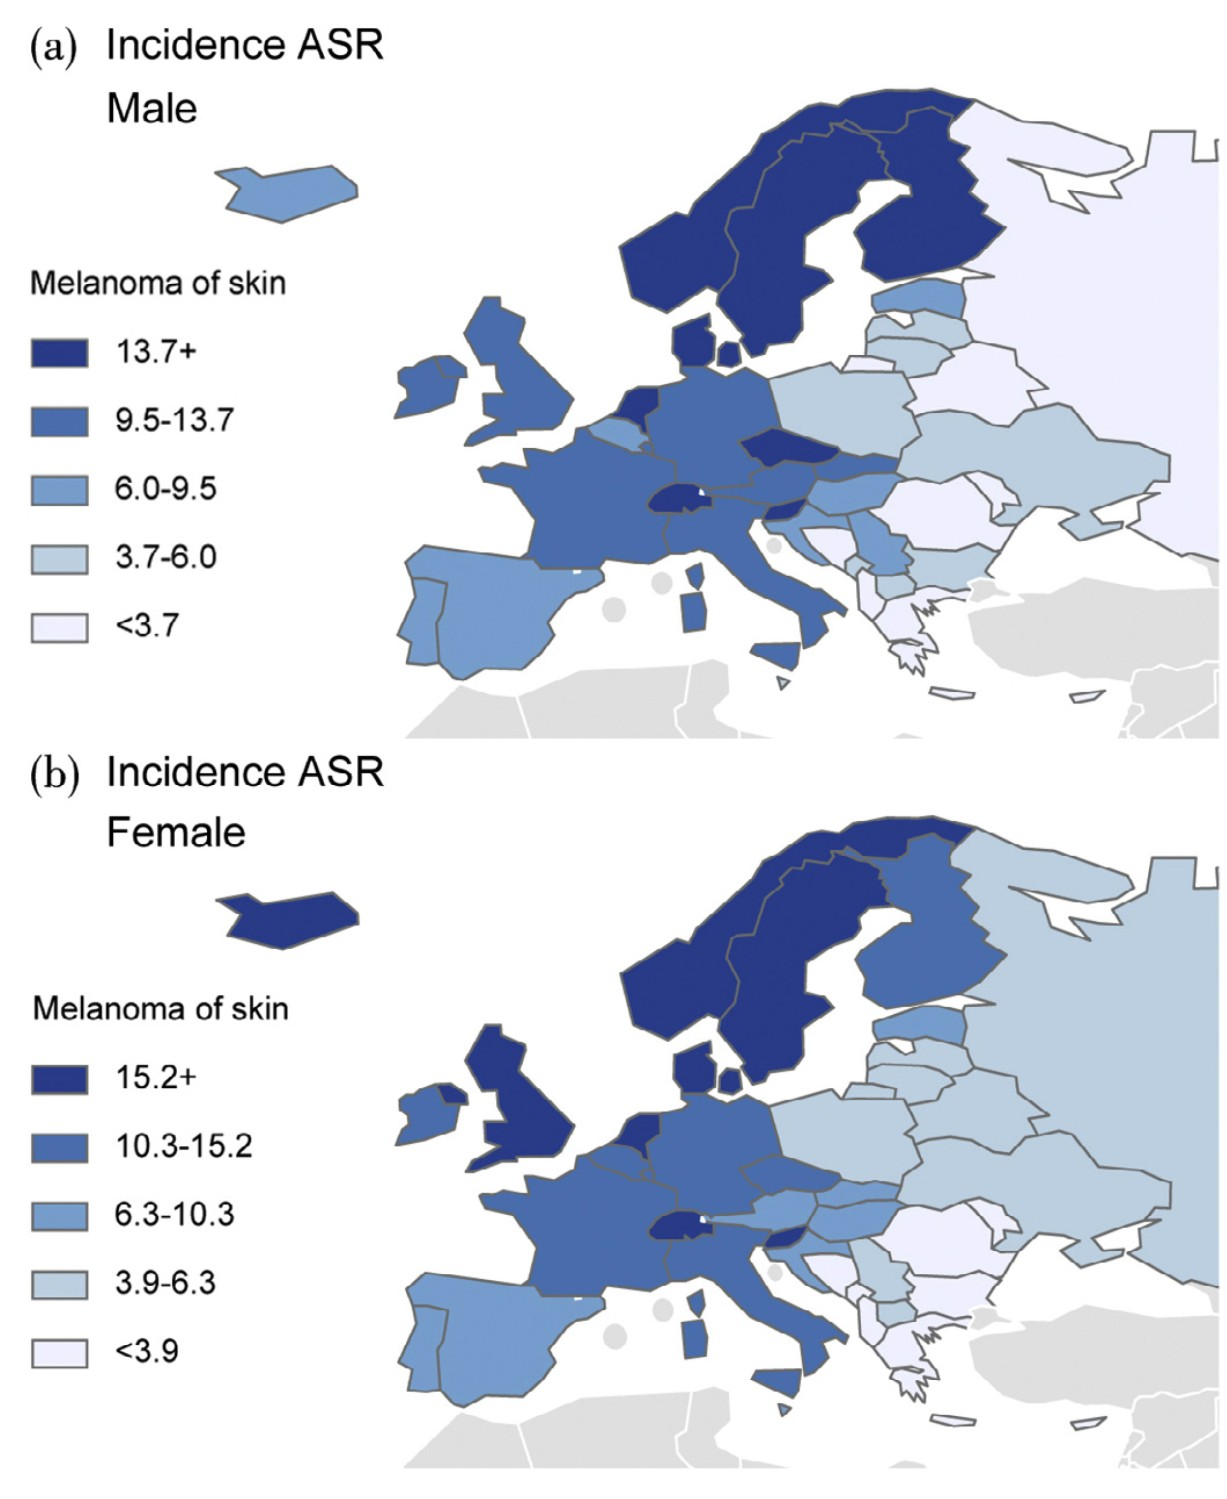 Estimates of agestandardised incidence rates (ASR) of malignant melanoma in 2012: incidence rates (per 100,000) in 2012